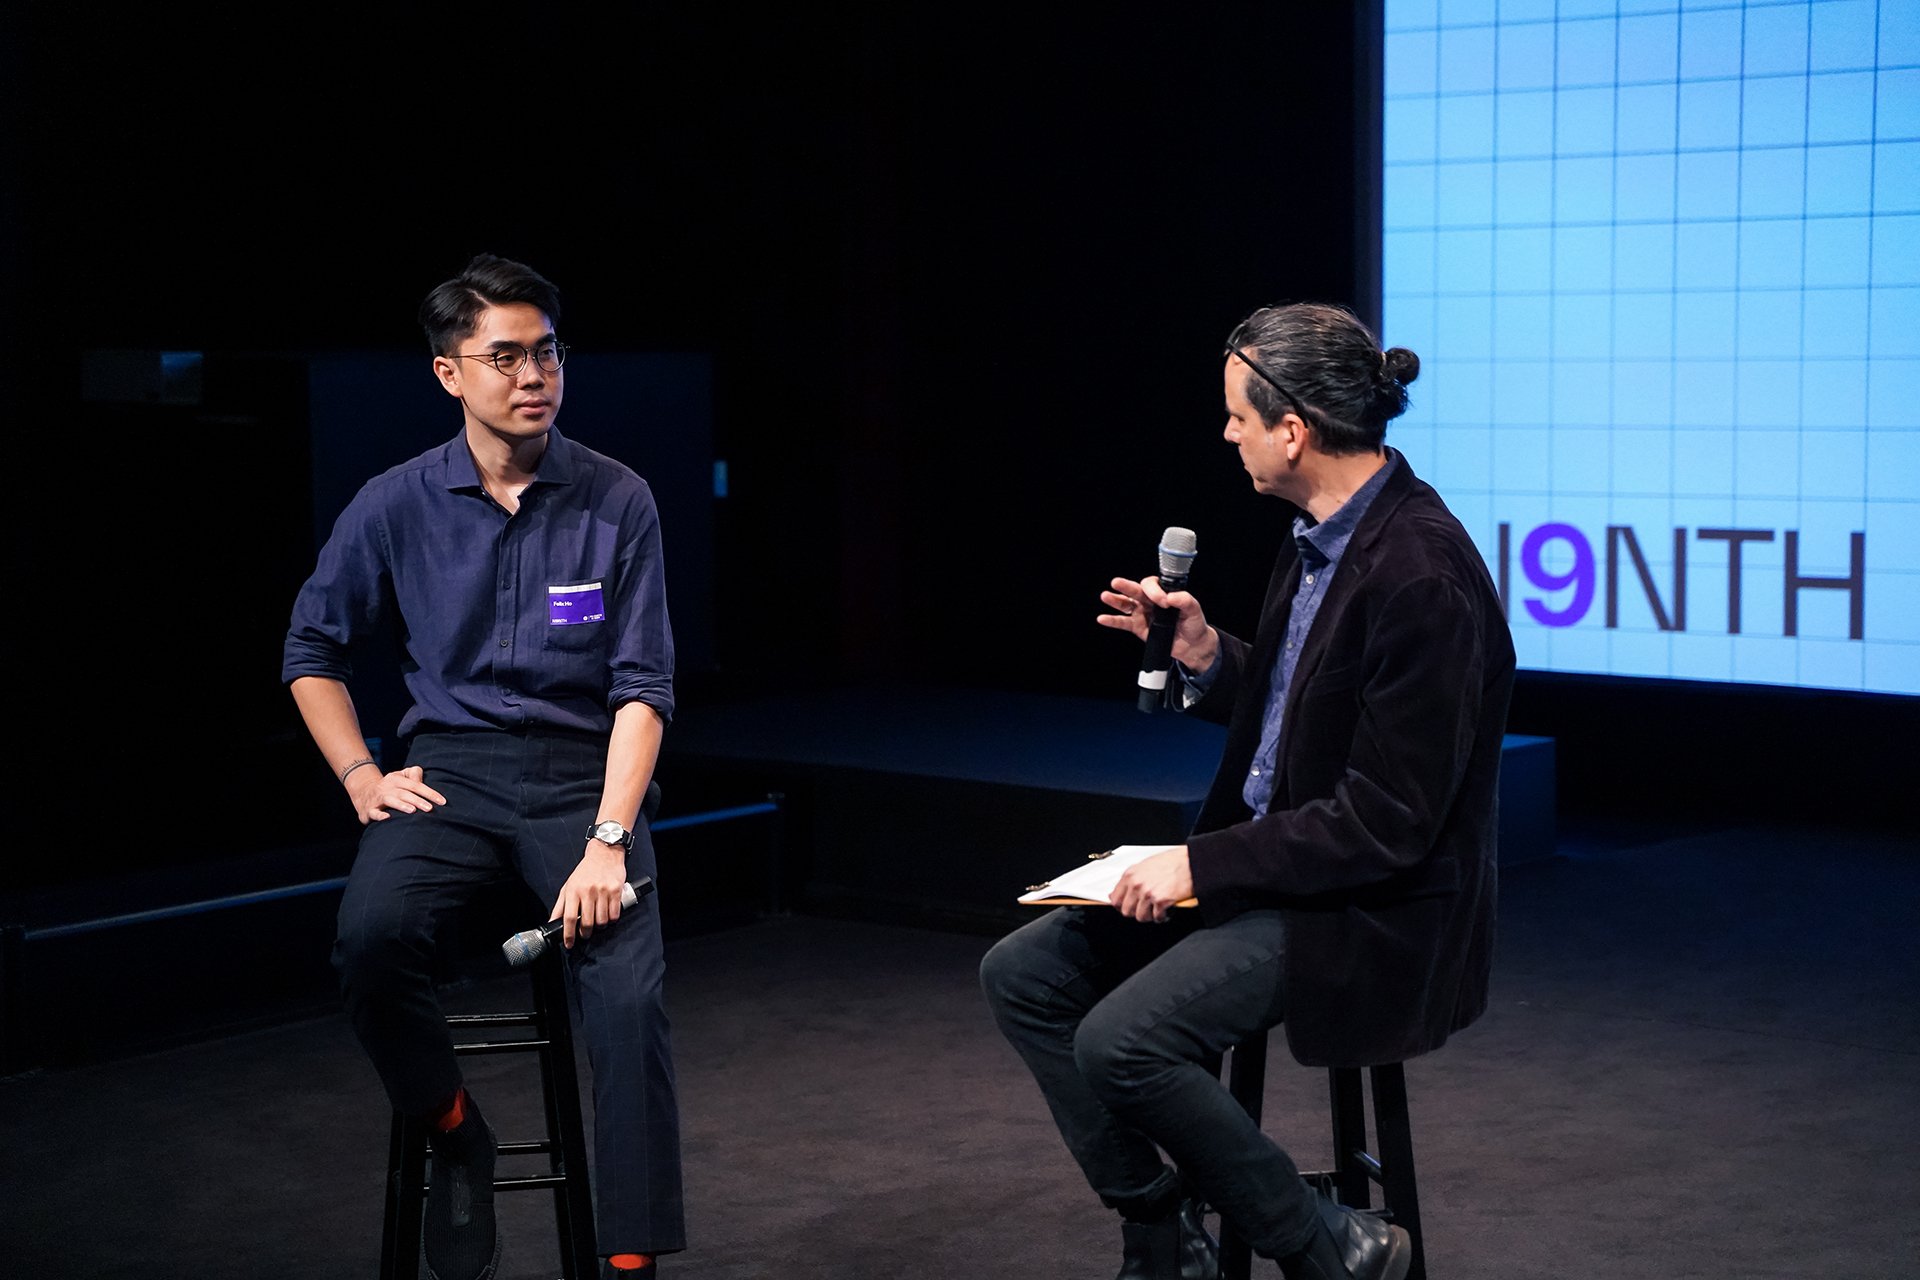  Student Felix Ho in conversation with Allan Chochinov. The two are sitting on stools and Allan is holding a microphone 